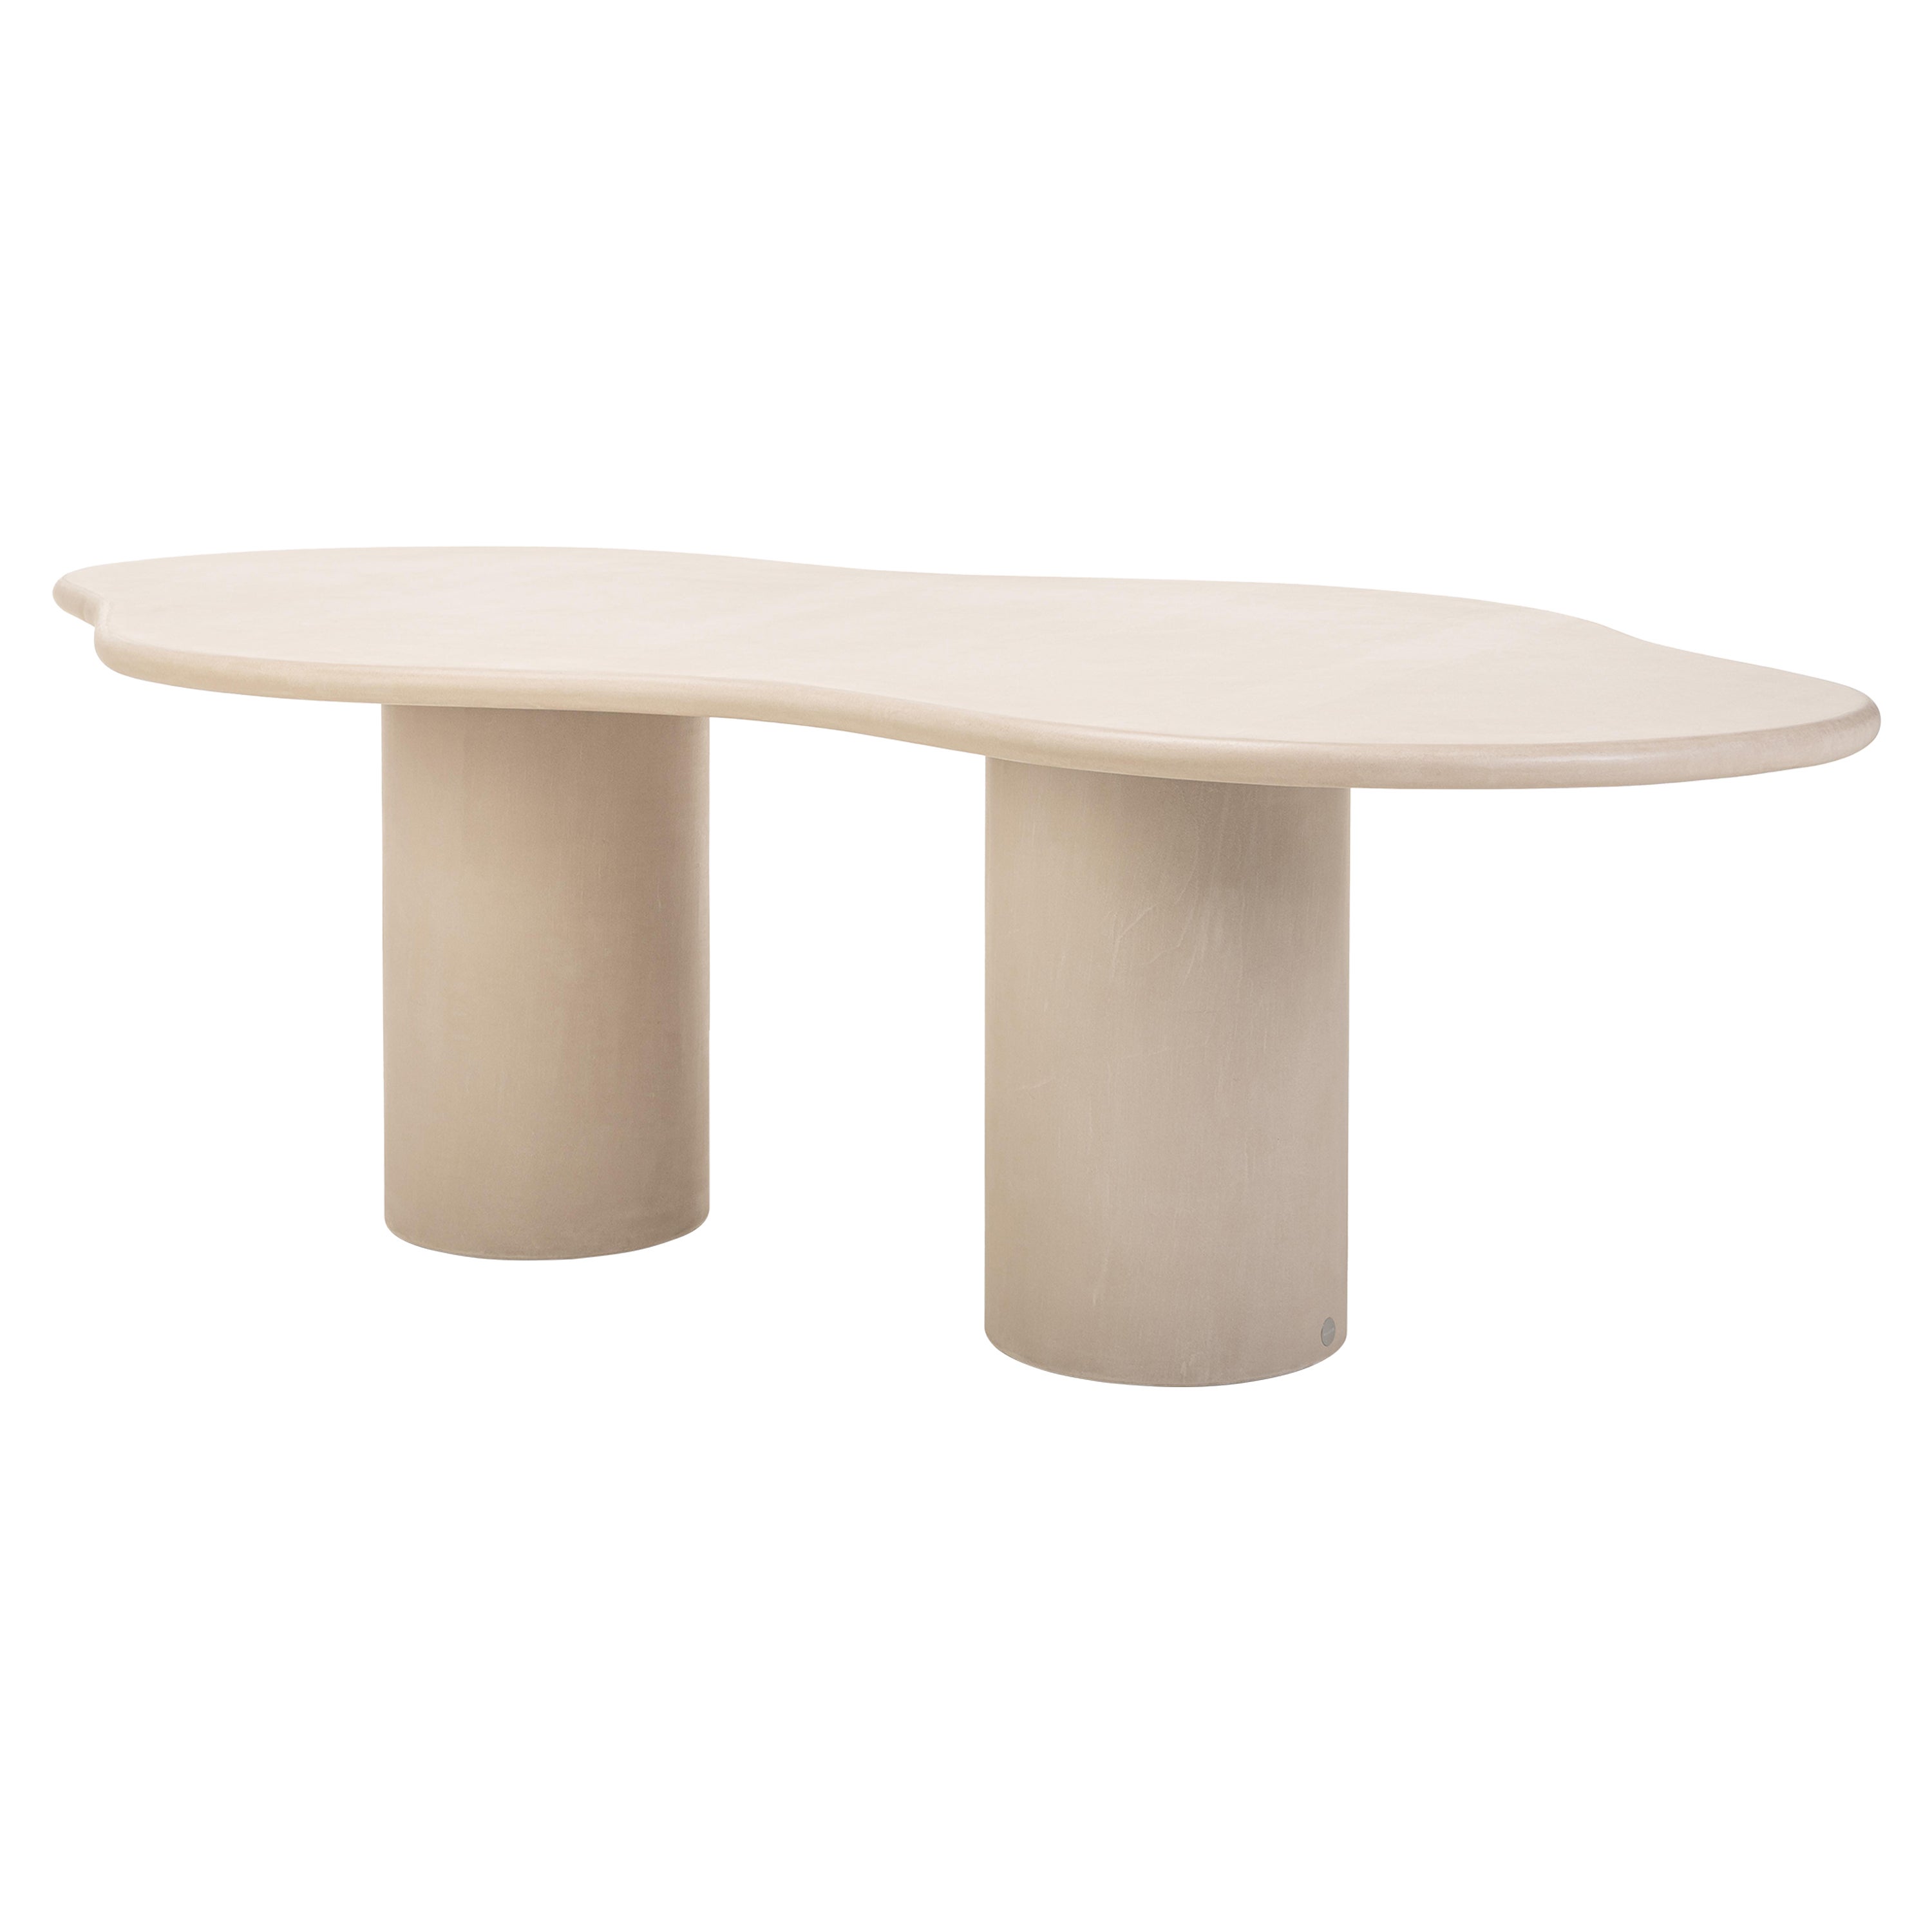 Contemporary Organic Natural Plaster "Fluent" Table 260cm by Isabelle Beaumont For Sale